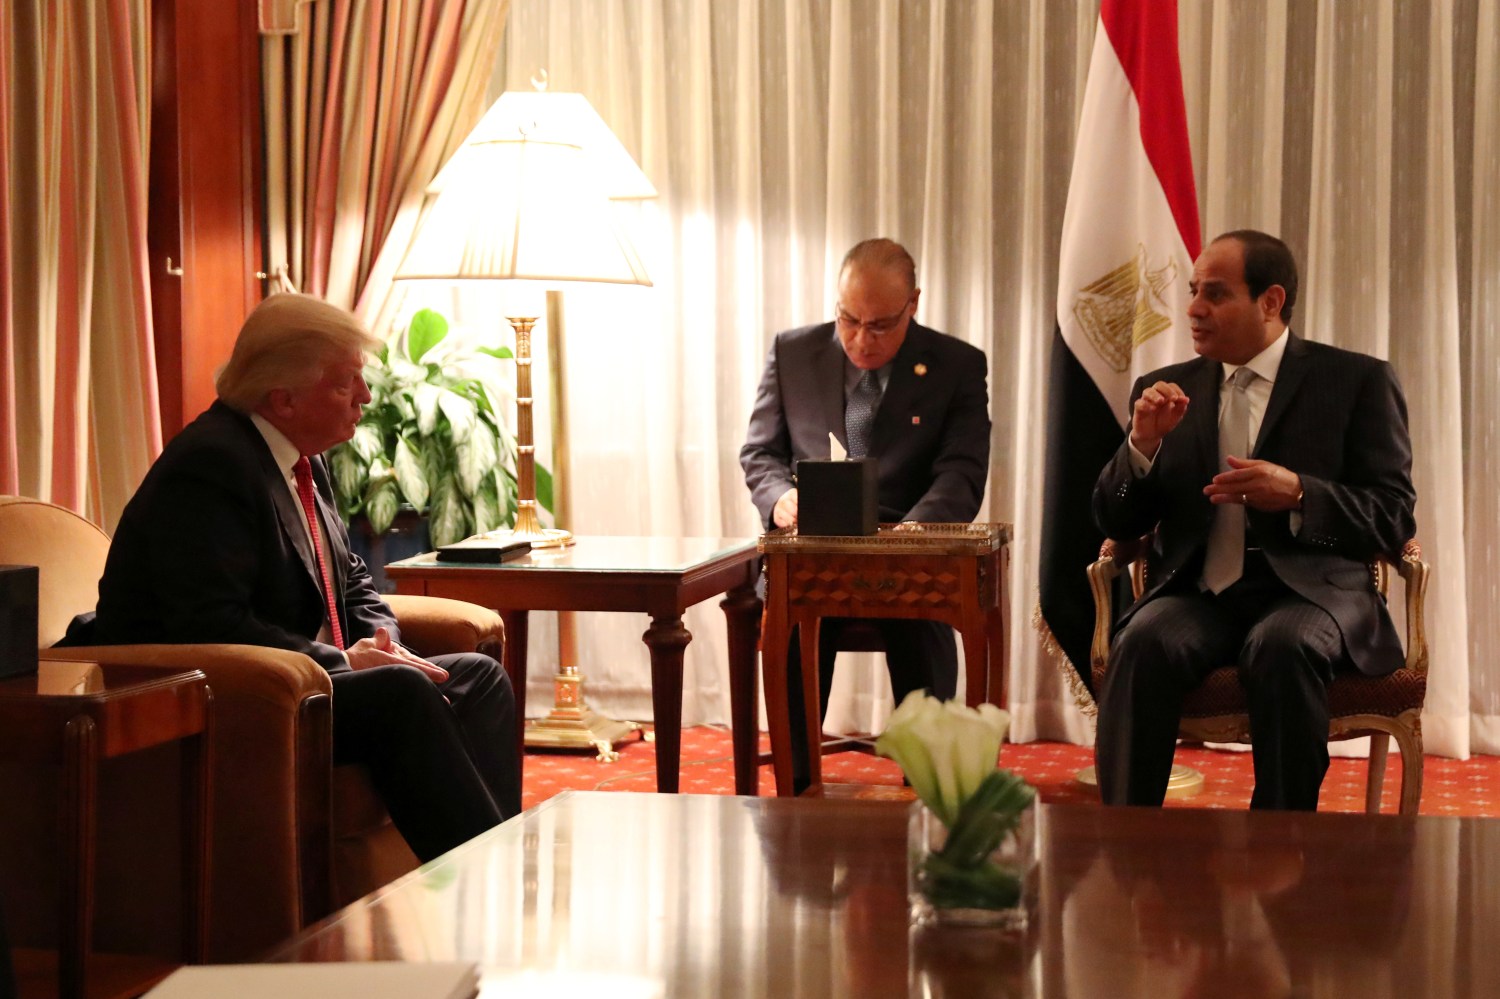 Republican presidential nominee Donald Trump holds a bilateral meeting with Egyptian President Abdel Fattah el-Sisi in Manhattan, New York, U.S., September 19, 2016. REUTERS/Carlo Allegri